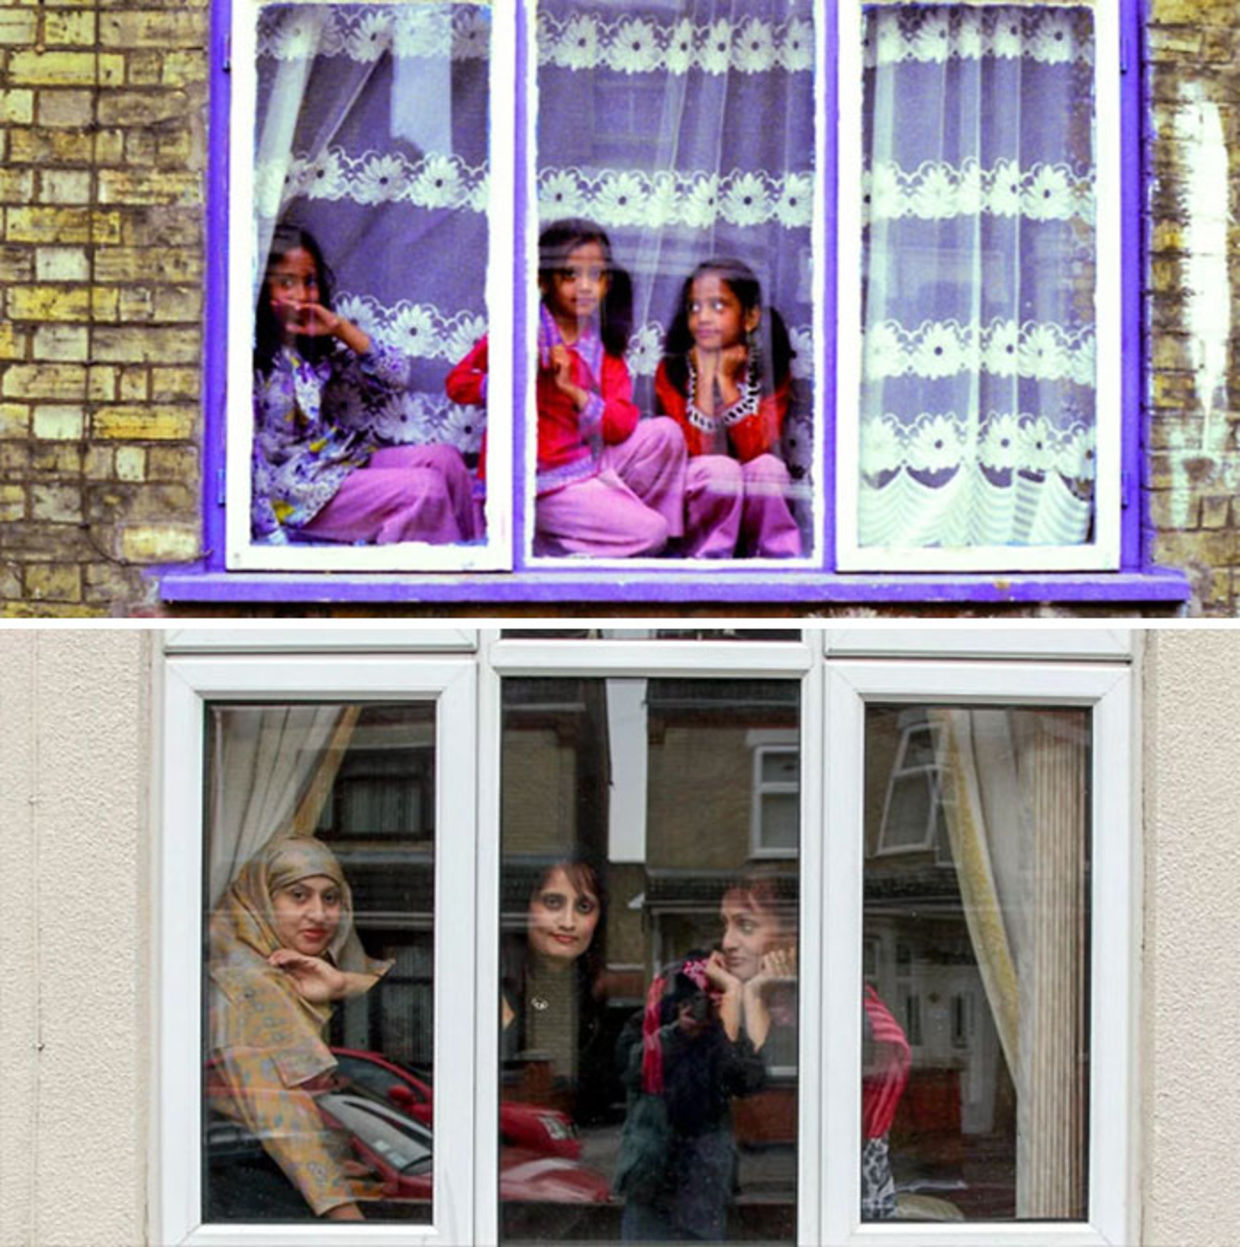 Shehnaz Begum, her twin sister Rukhsana and their older sister Itrat were spotted by Porsz sitting in the window of their house on Cromwell Road. The sisters still live in Peterborough and see each other regularly. (Chris Porsz)